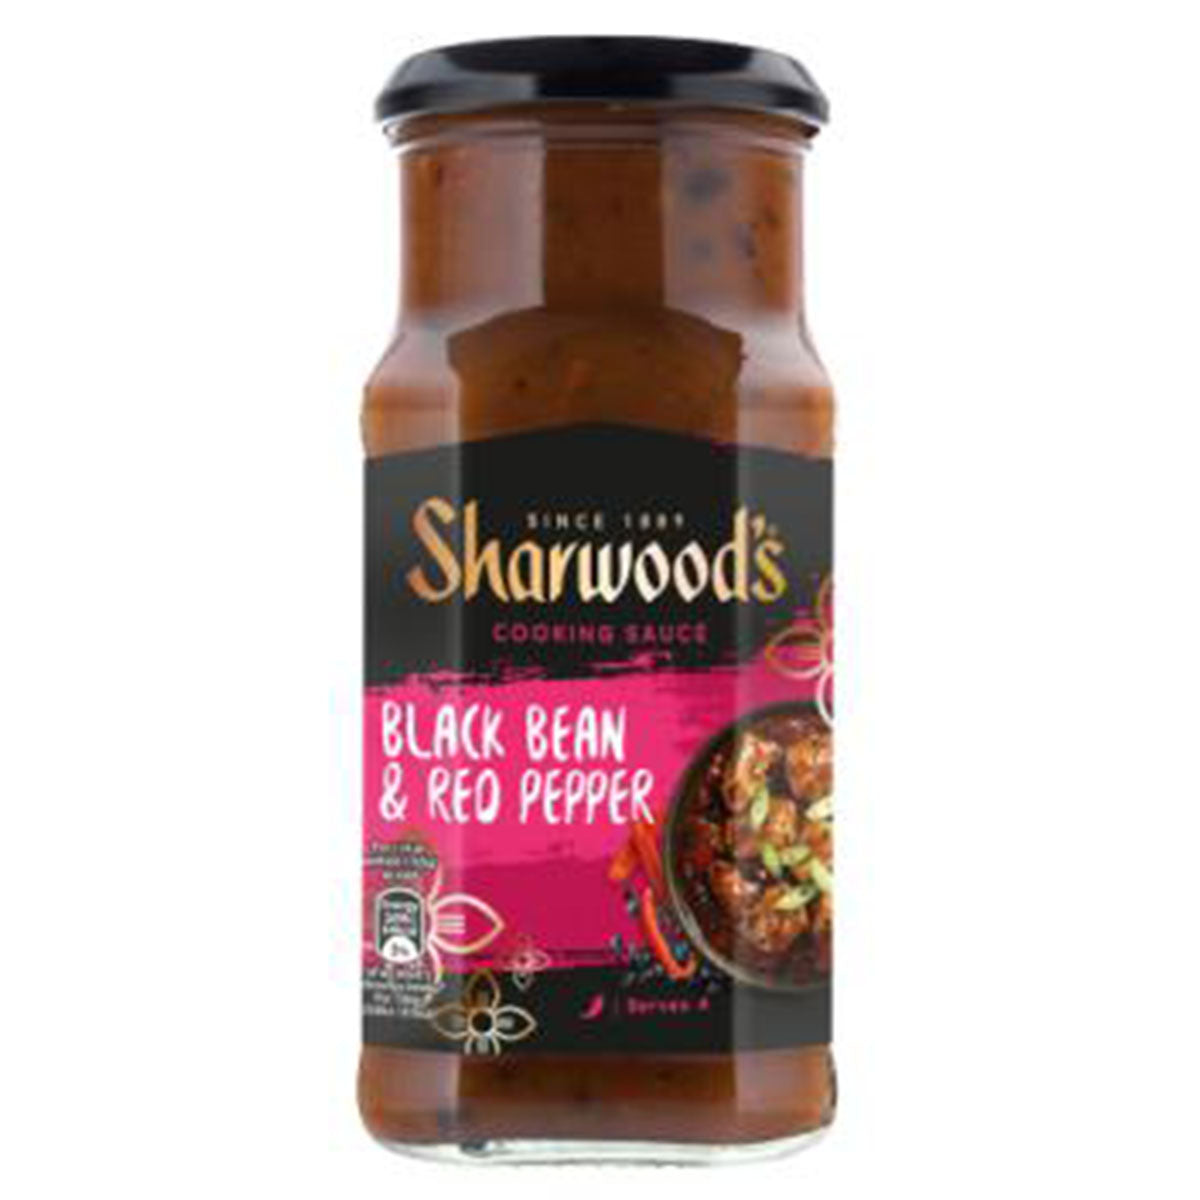 Sharwood's - Black Bean & Red Pepper Chinese Cooking Sauce - 425g - Continental Food Store